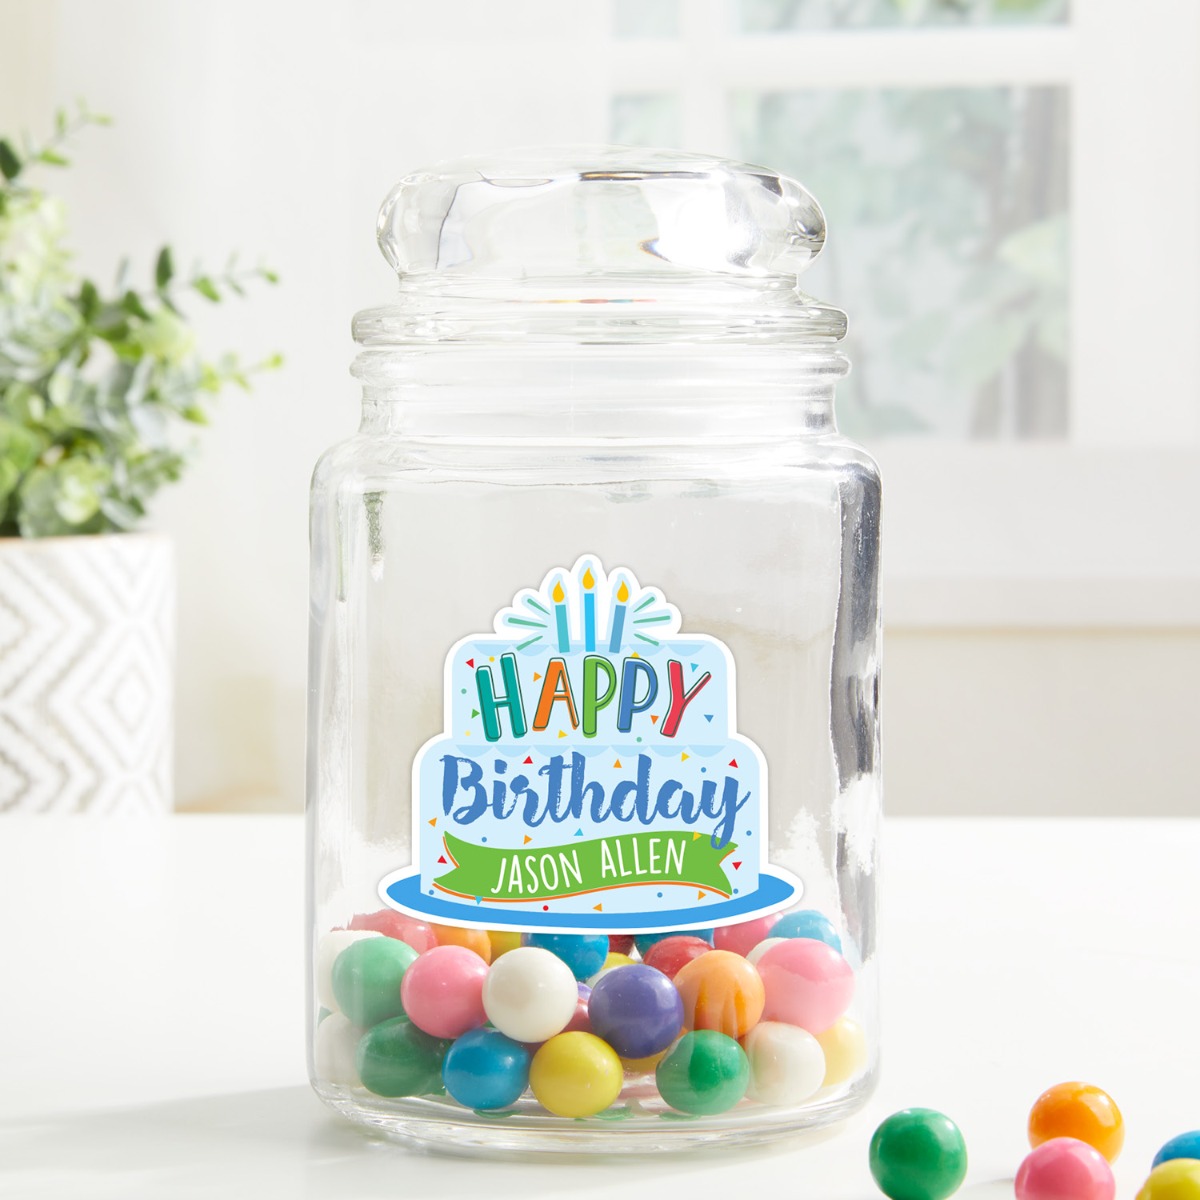 Happy birthday cake glass treat jar with name and 3 candle design 